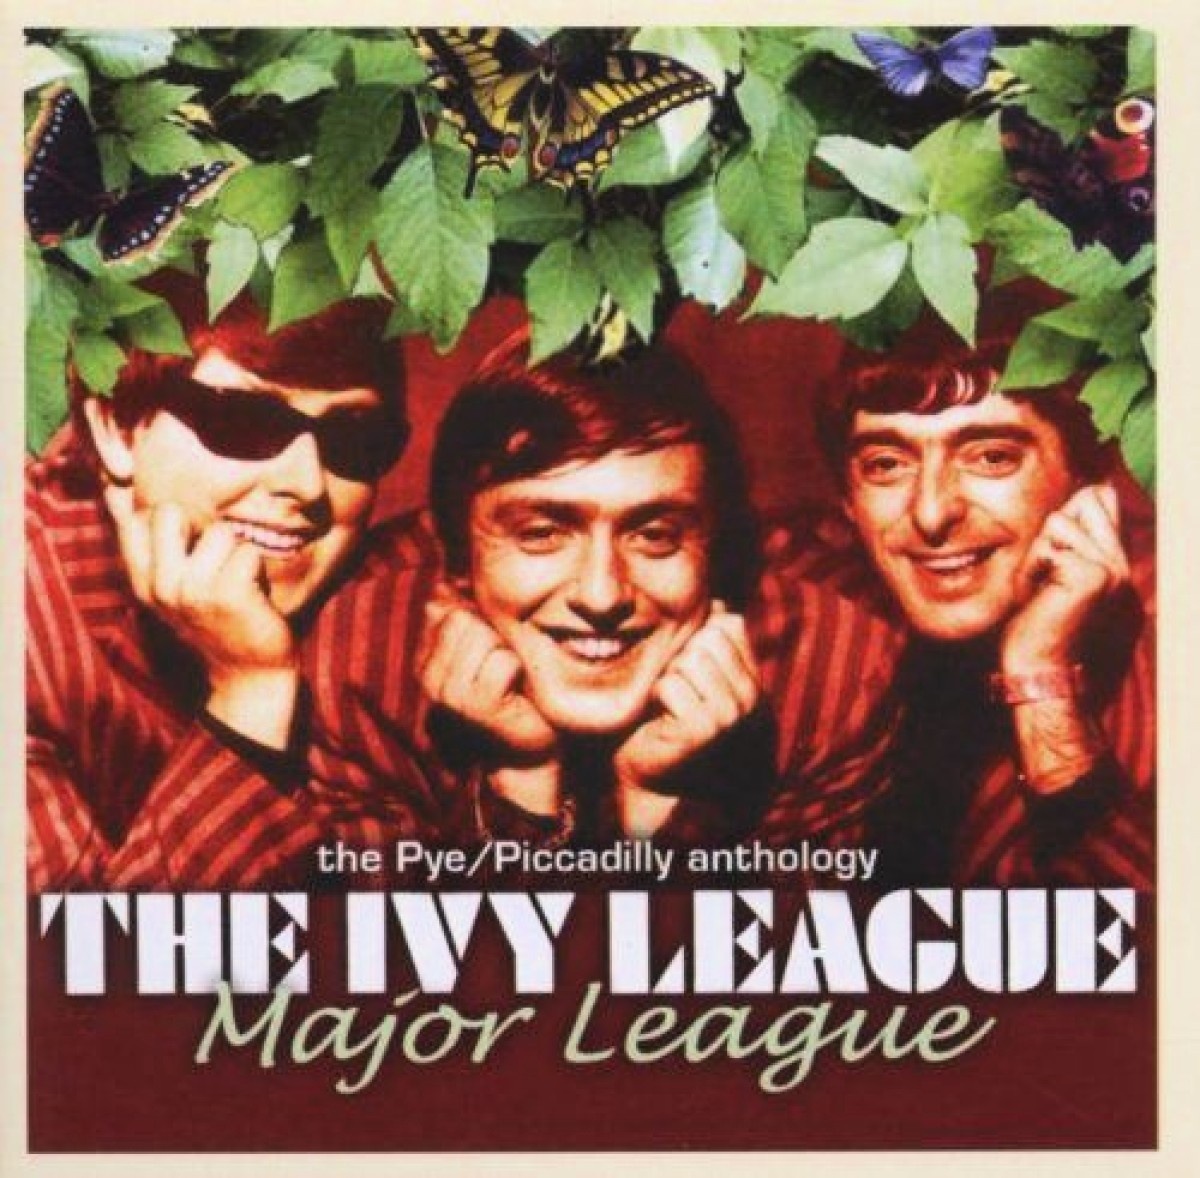 Major League-The Pye/Piccadilly Anthology - The Ivy League. (CD)